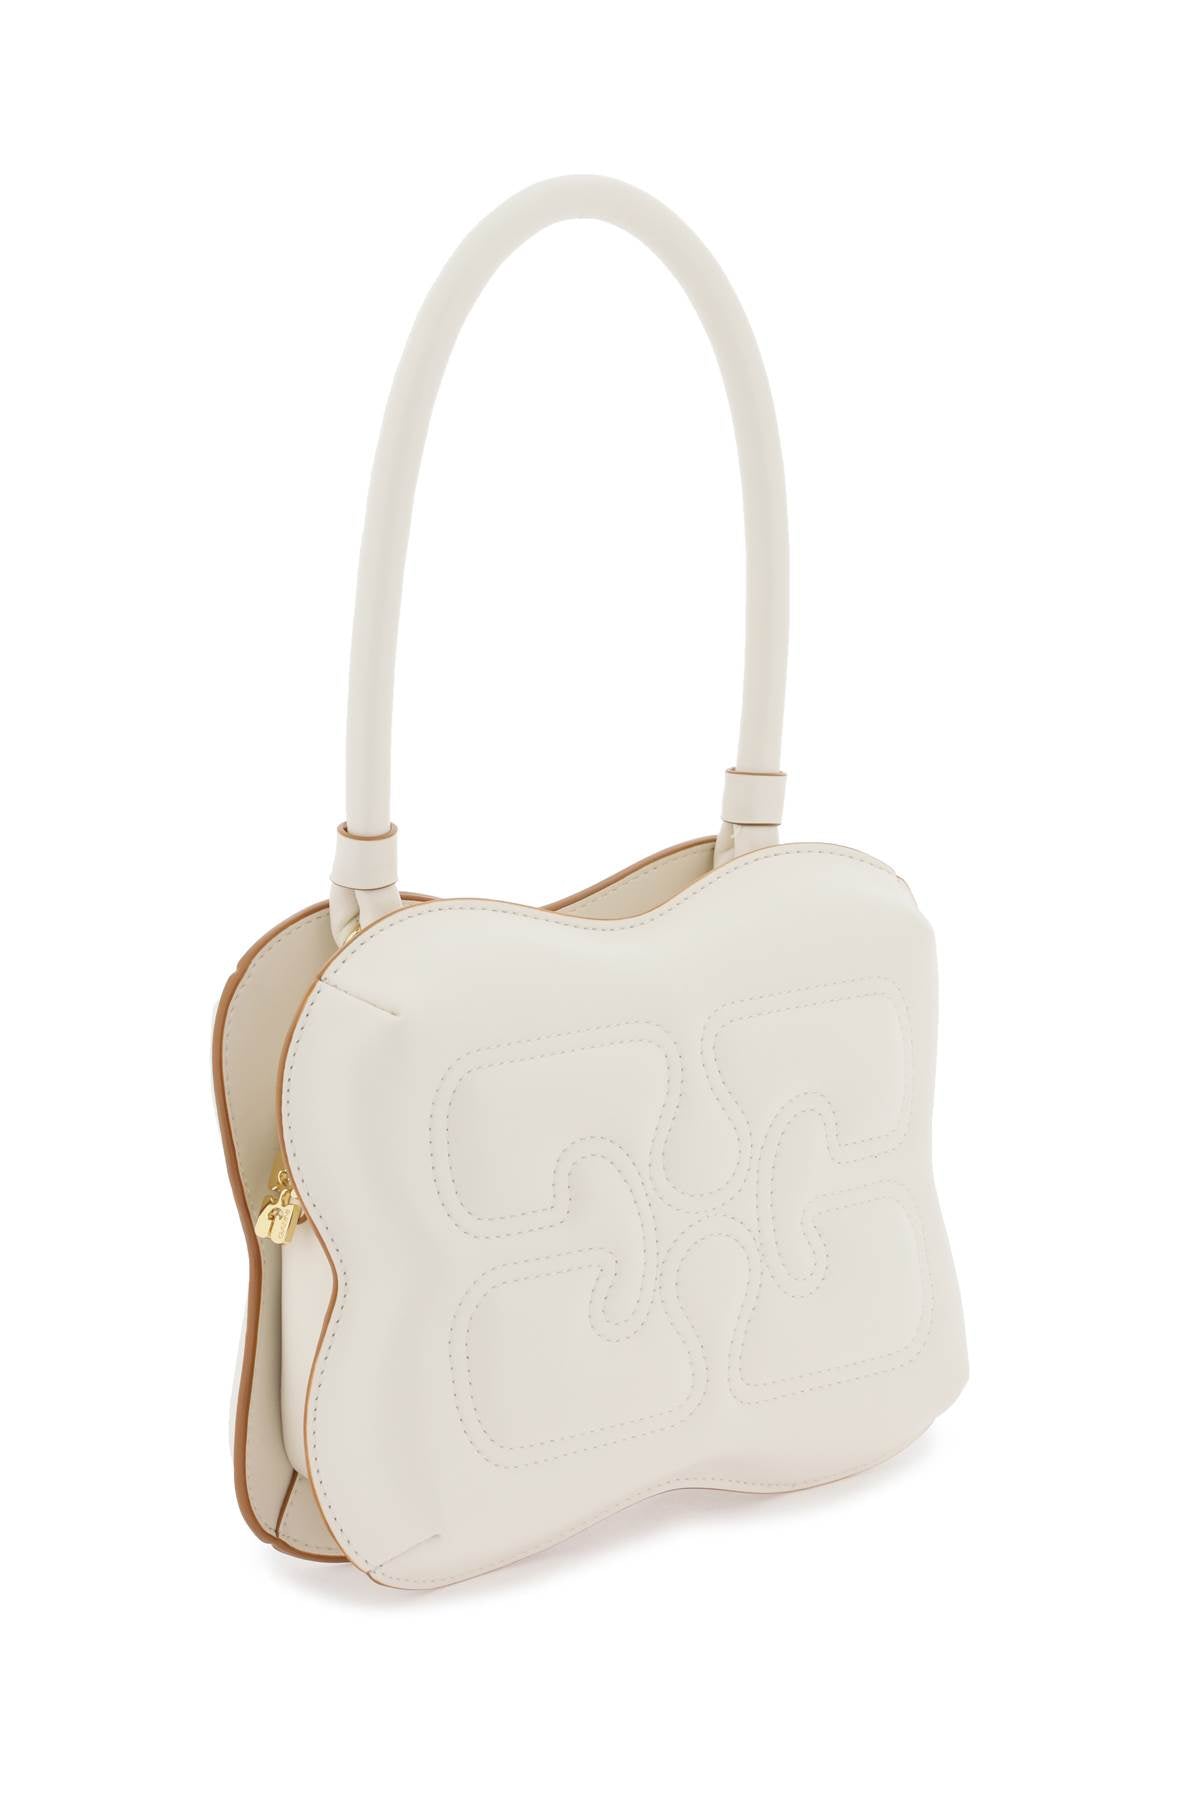 Ganni Butterfly Recyled Leather Handbag White